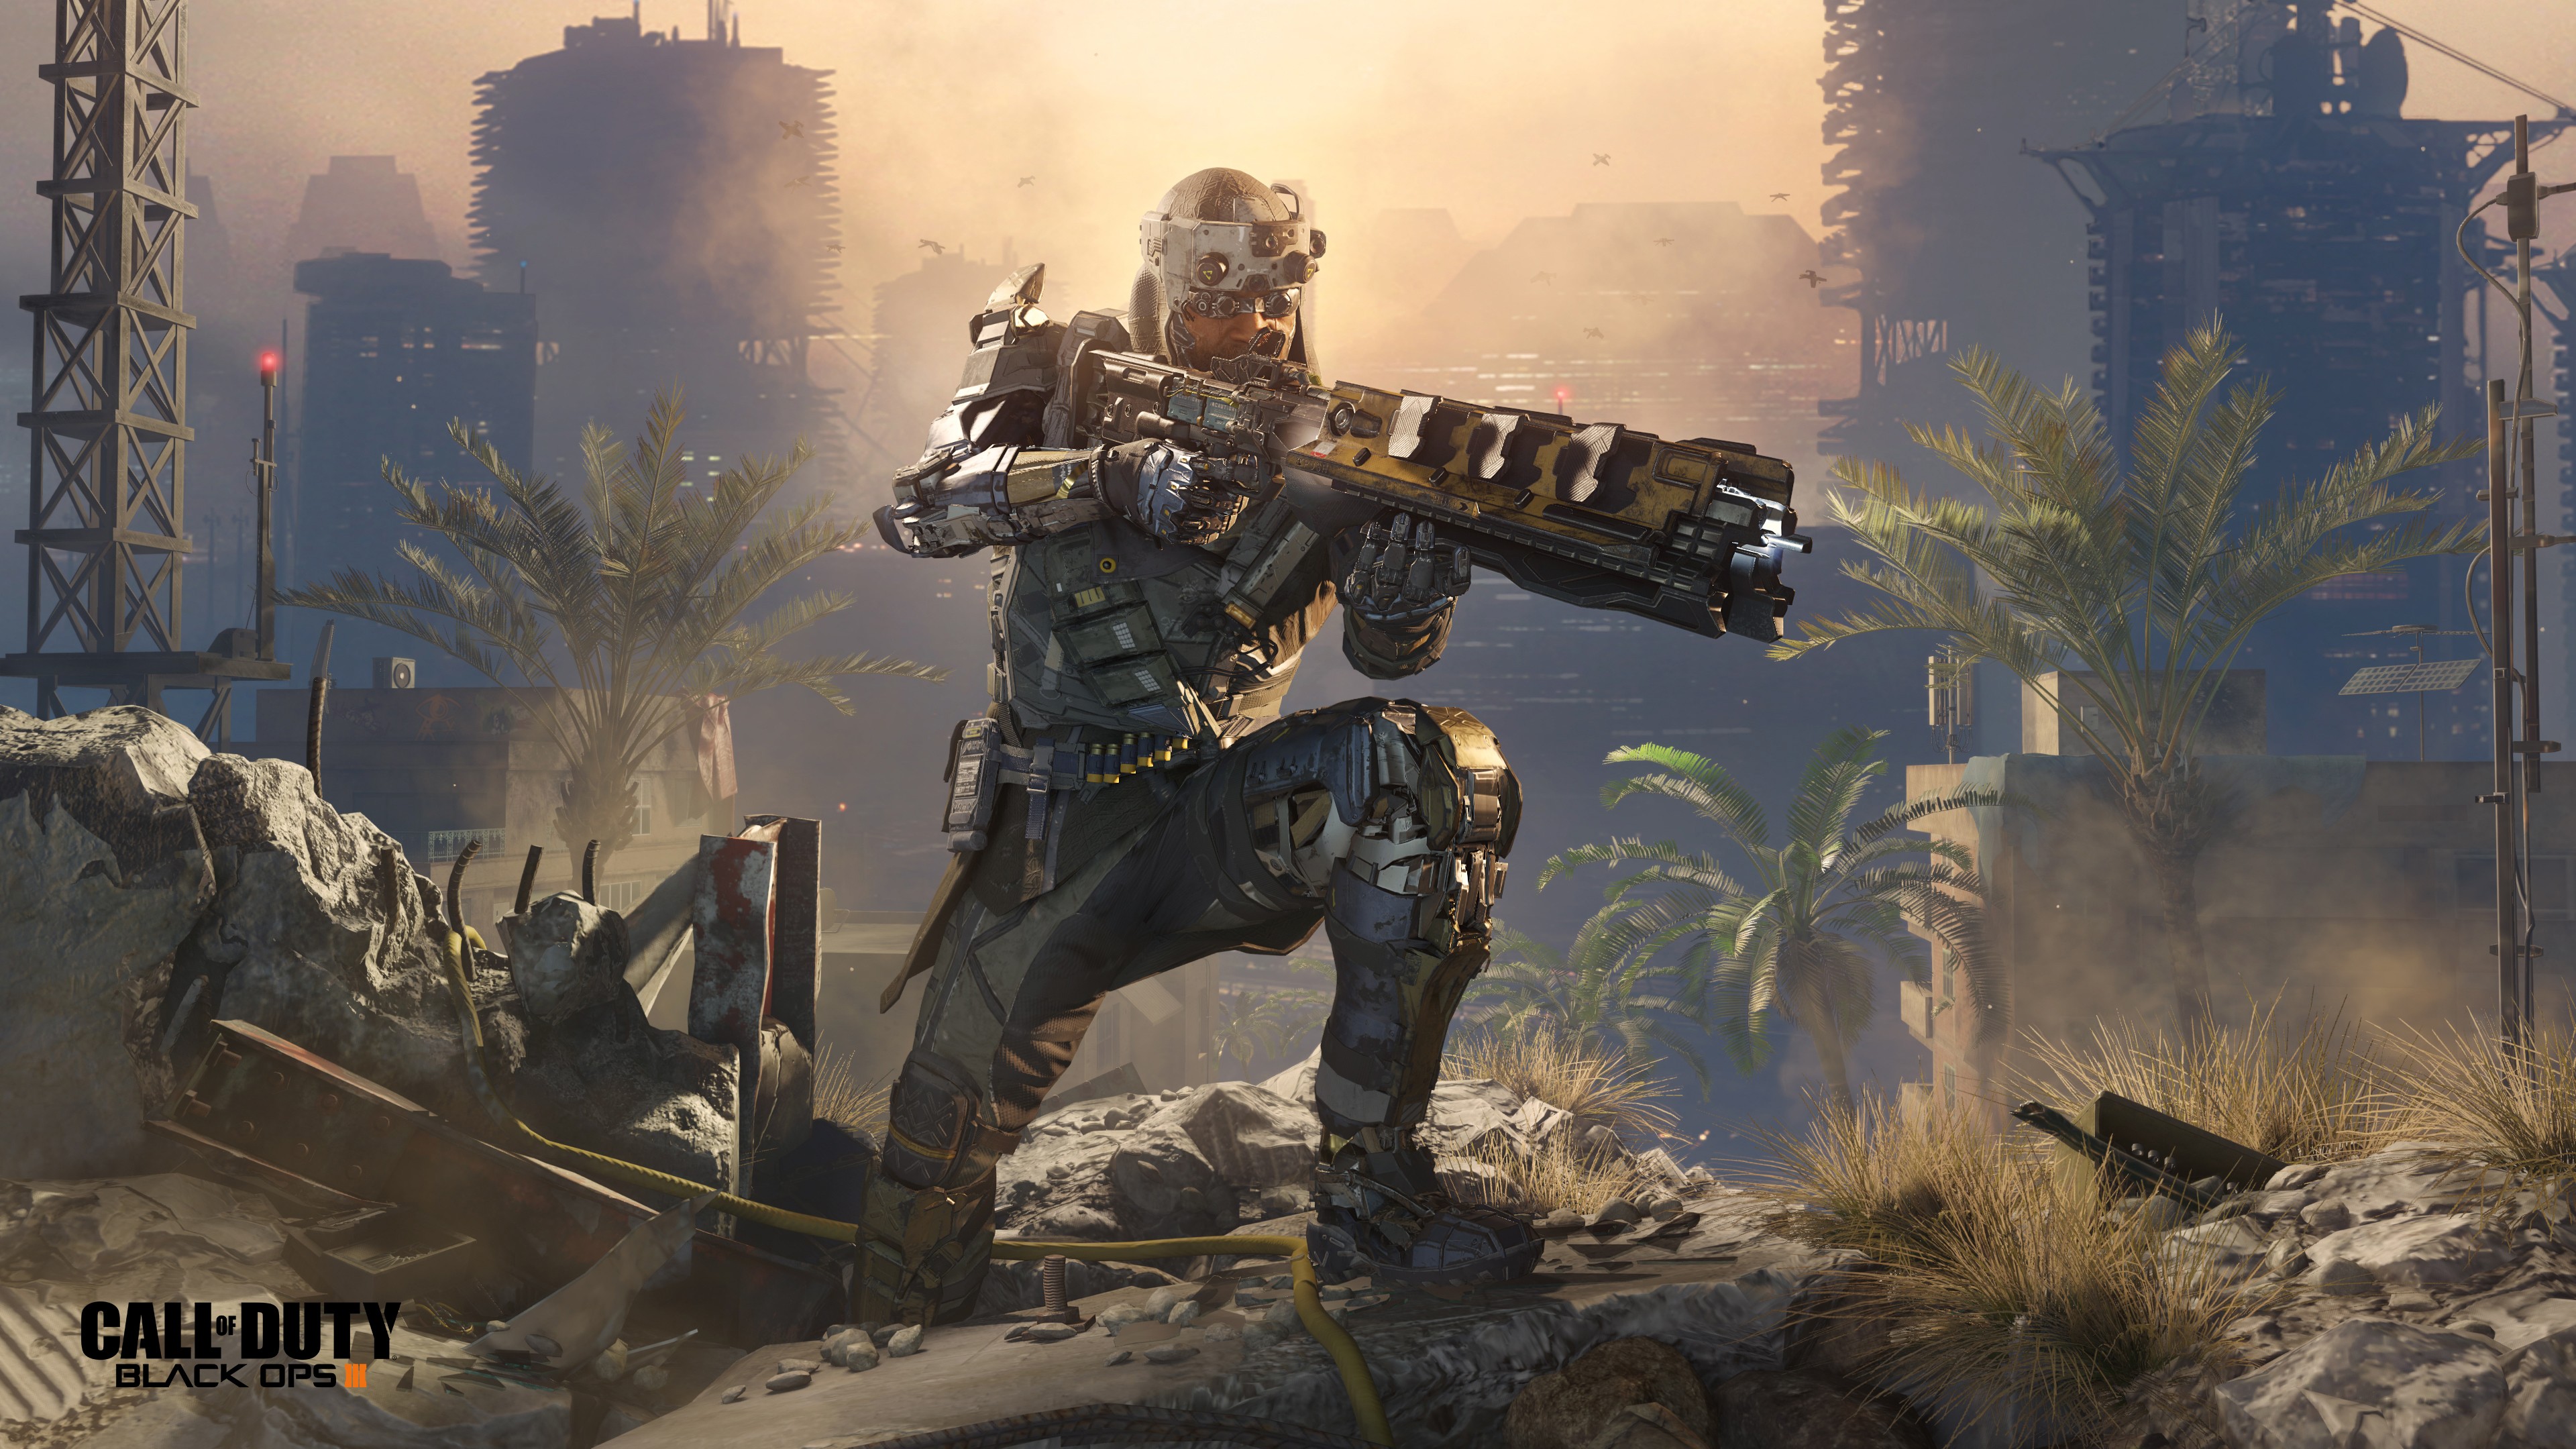 Call Of Duty: Black Ops III, Call Of Duty, Video Games, Military, Soldier Wallpaper